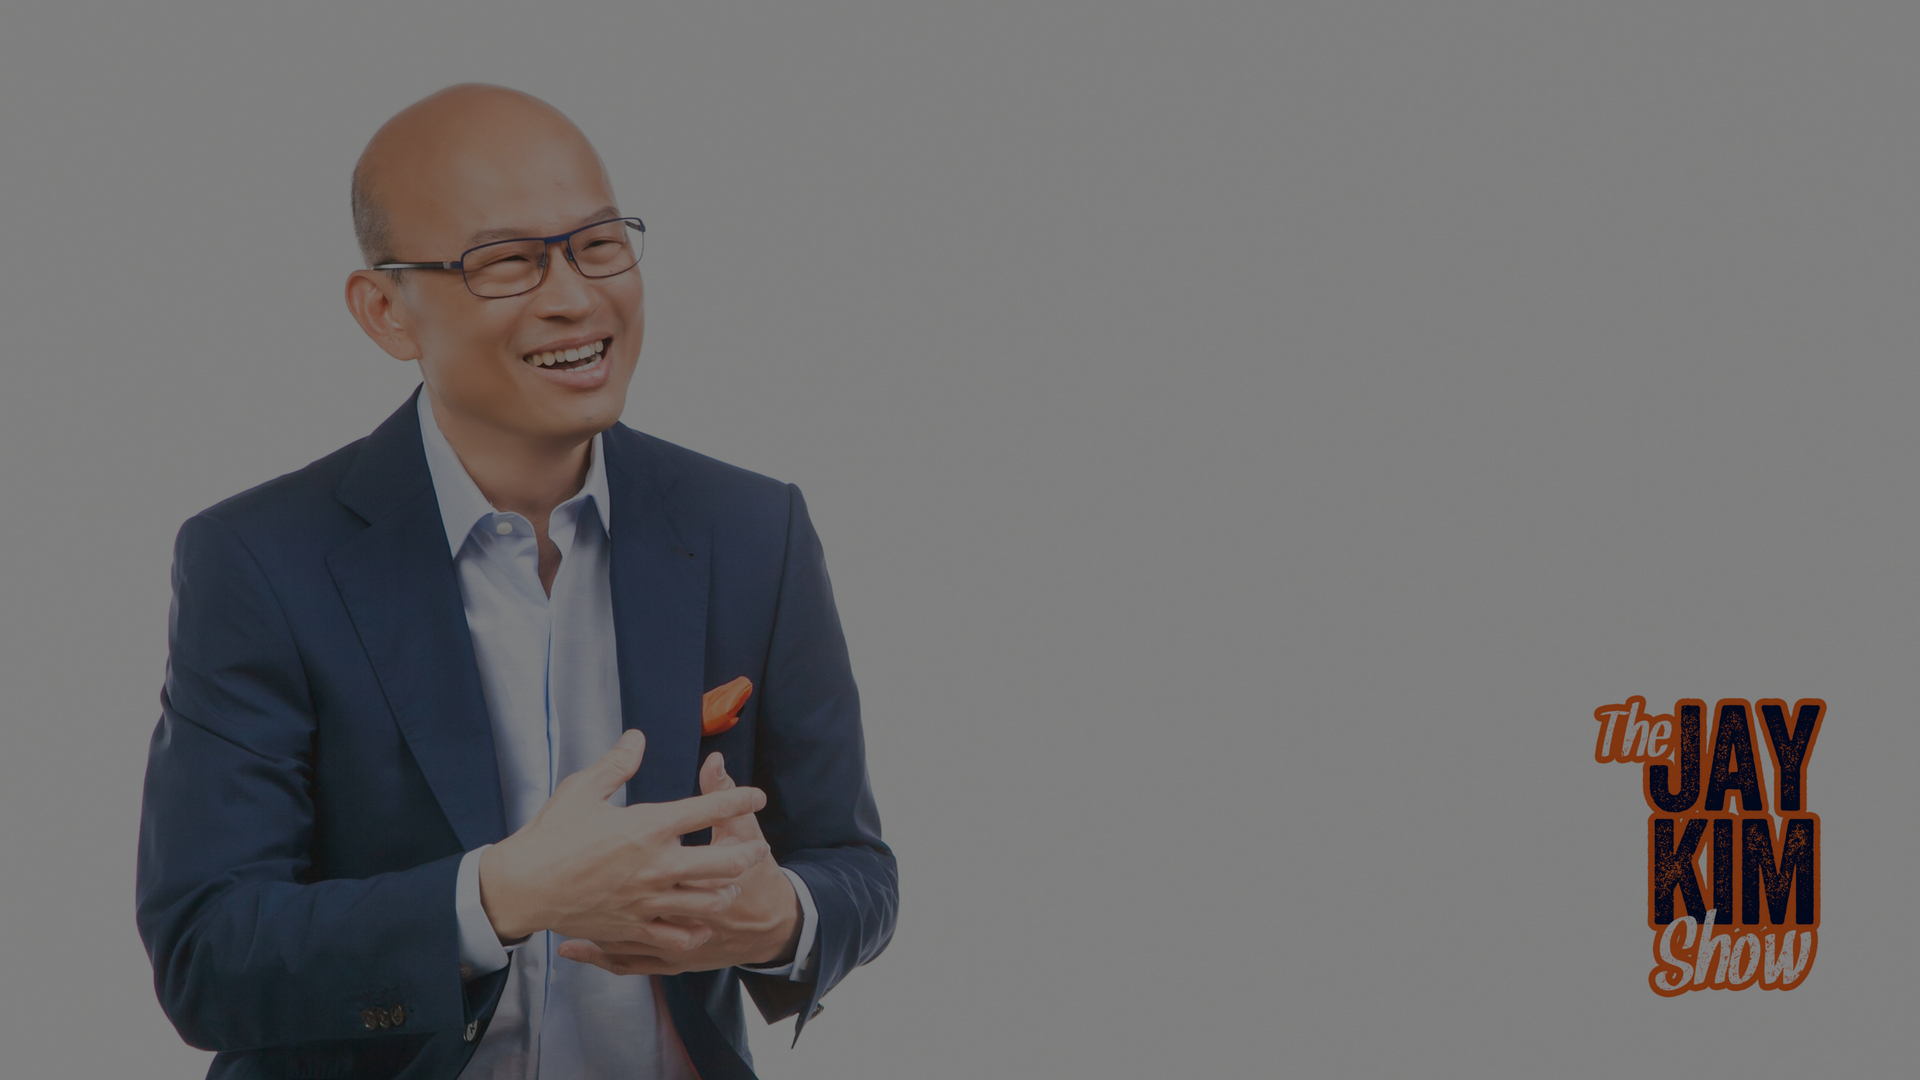 Peng T. Ong, serial entrepreneur, co-founder and managing partner of Monk’s Hill Ventures